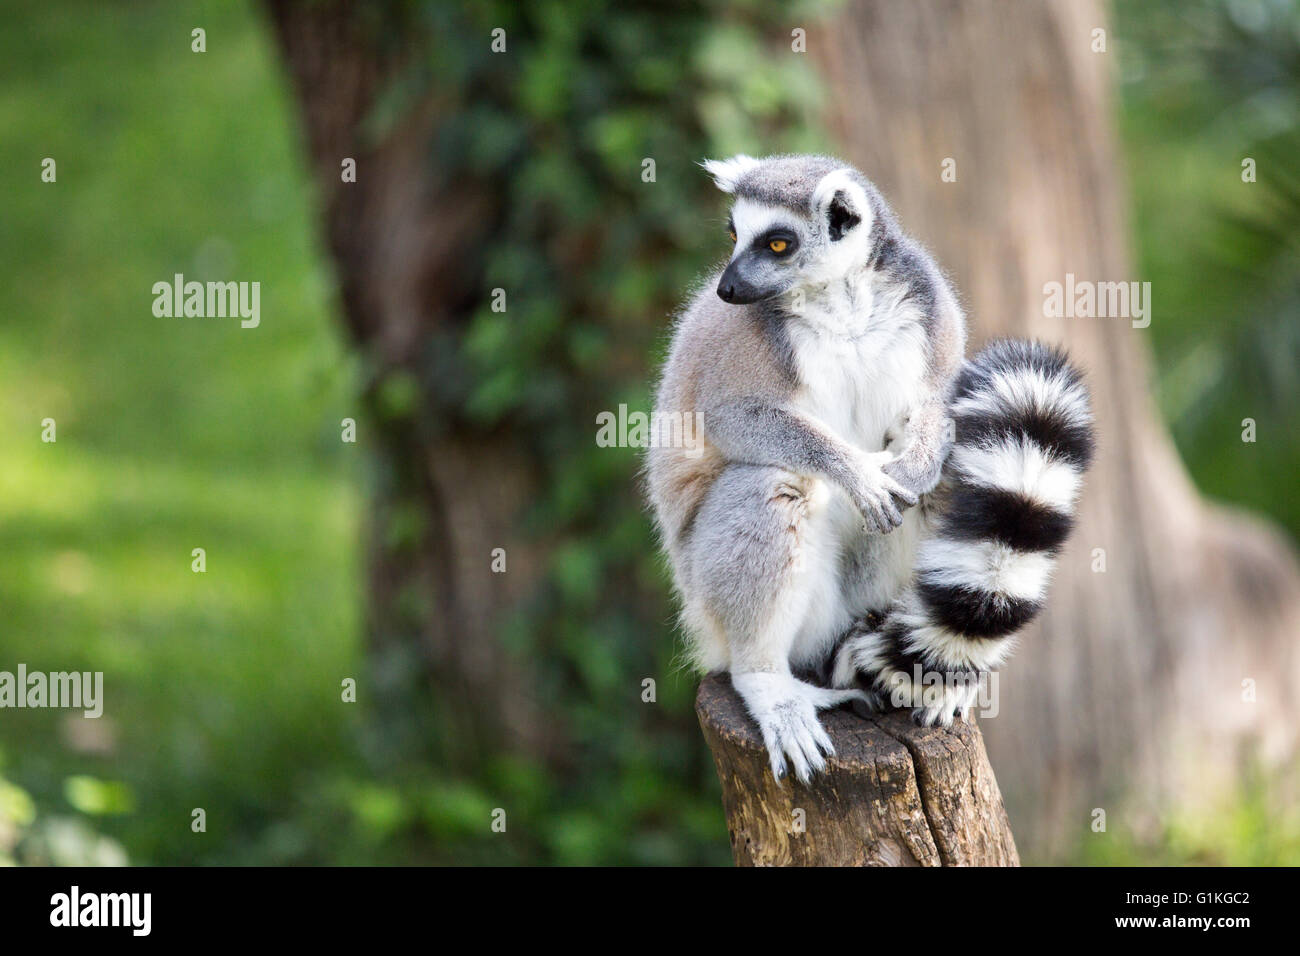 A ring-tailed lemur, Lemur catta, sitting on a log and looking around Stock Photo